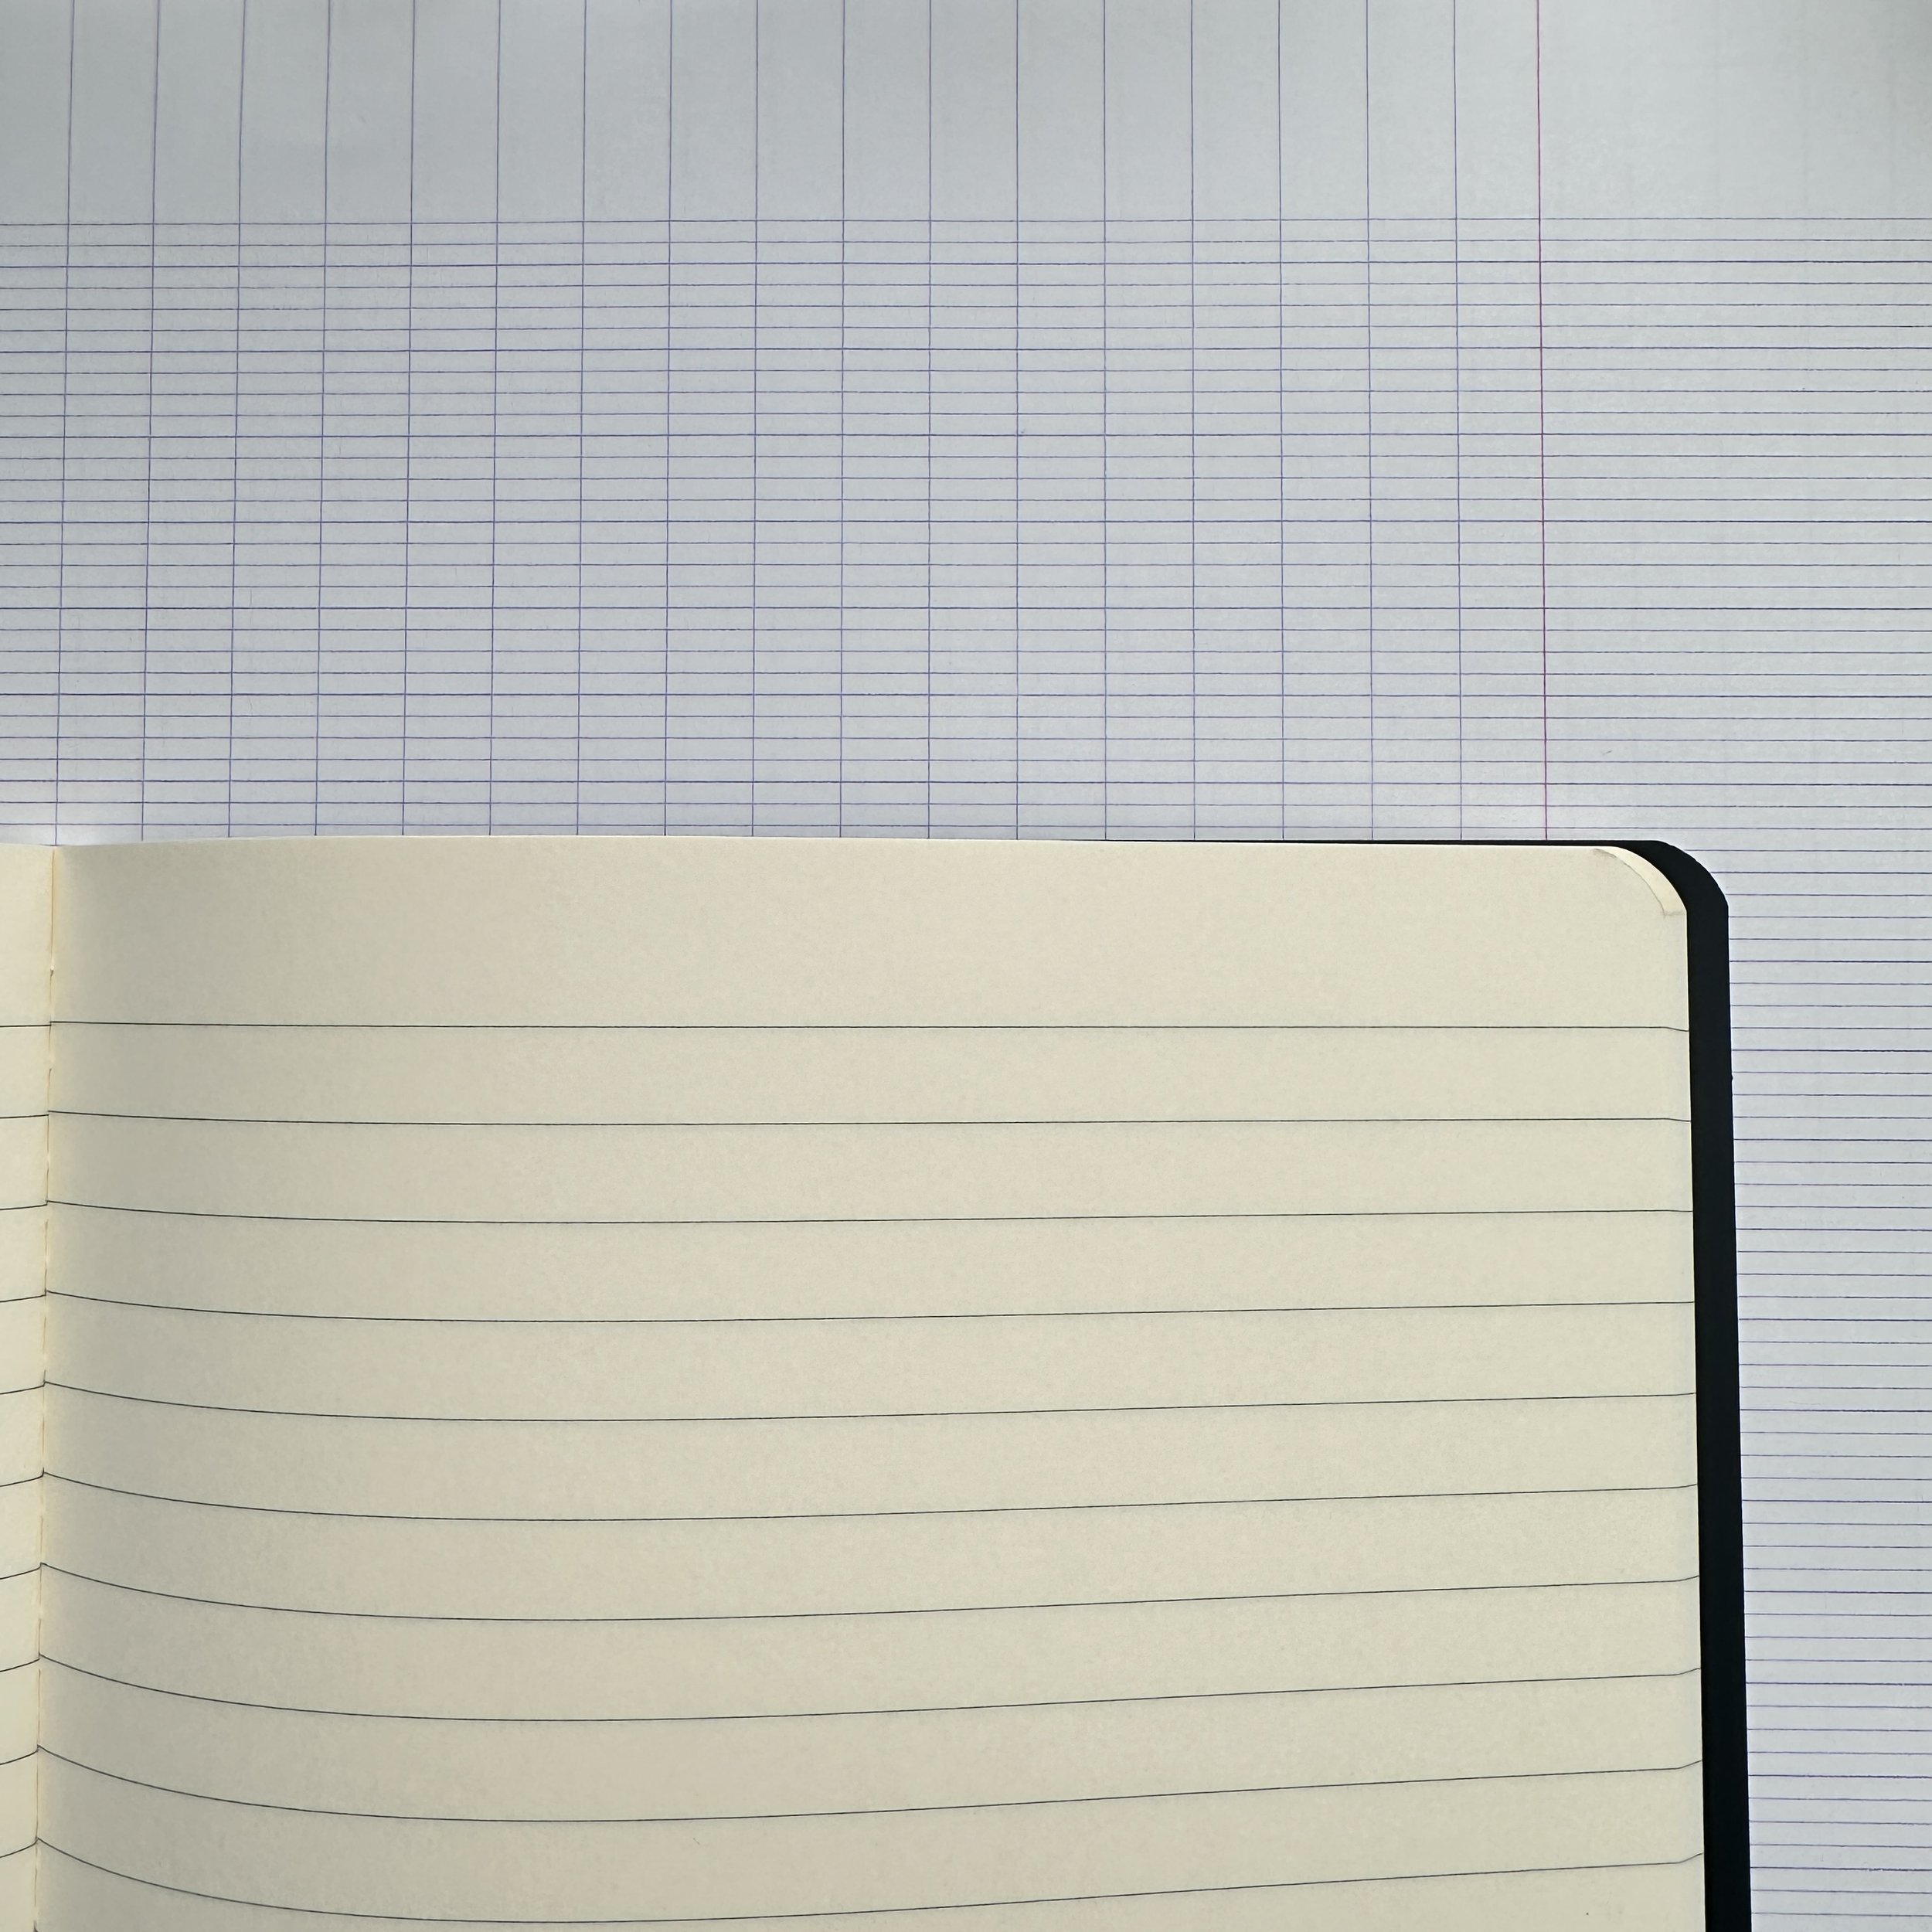 The Best Paper for Everyday Writing, Part III: The Best Spiral Notebooks —  The Gentleman Stationer